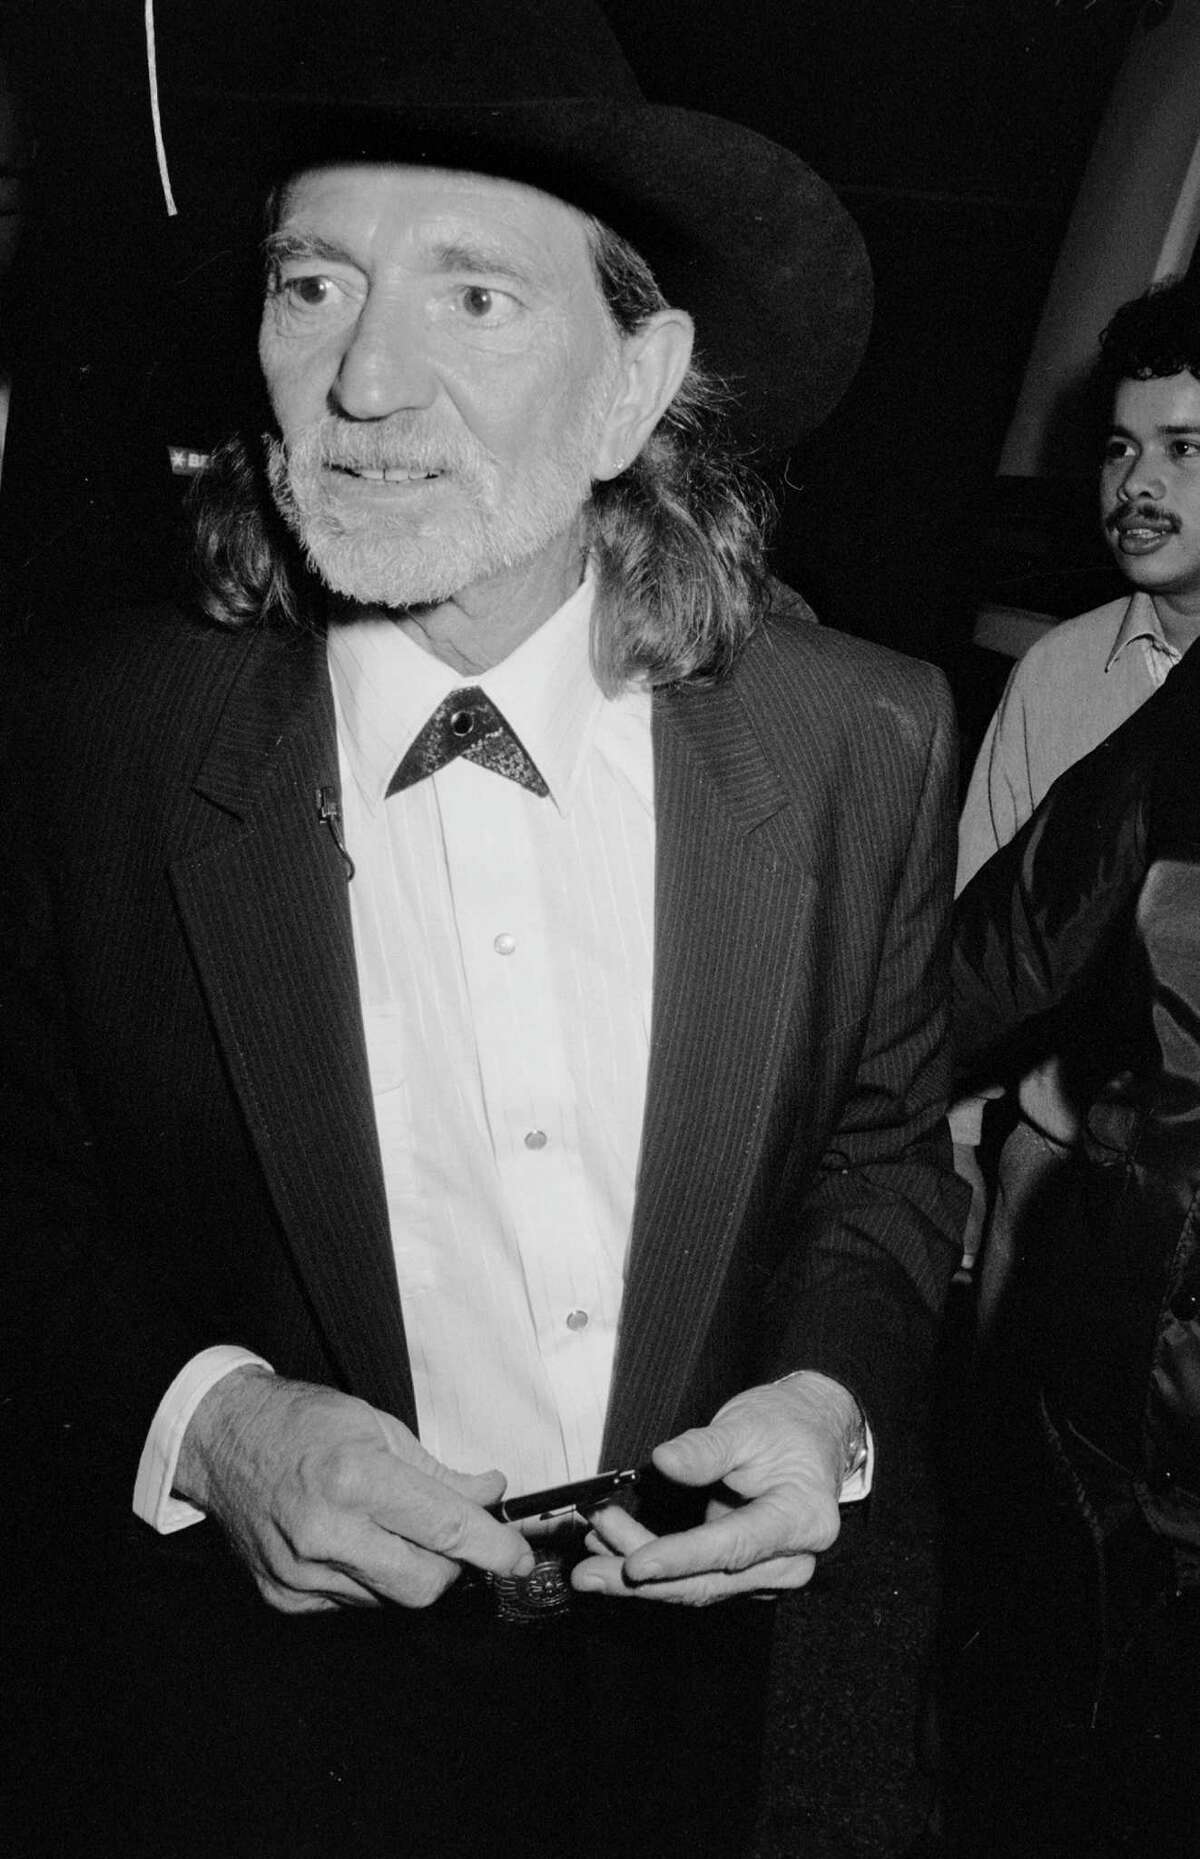 Willie Nelson has made some pretty famous people over the years.Important figures in his lifeThe zen of Willie Nelson